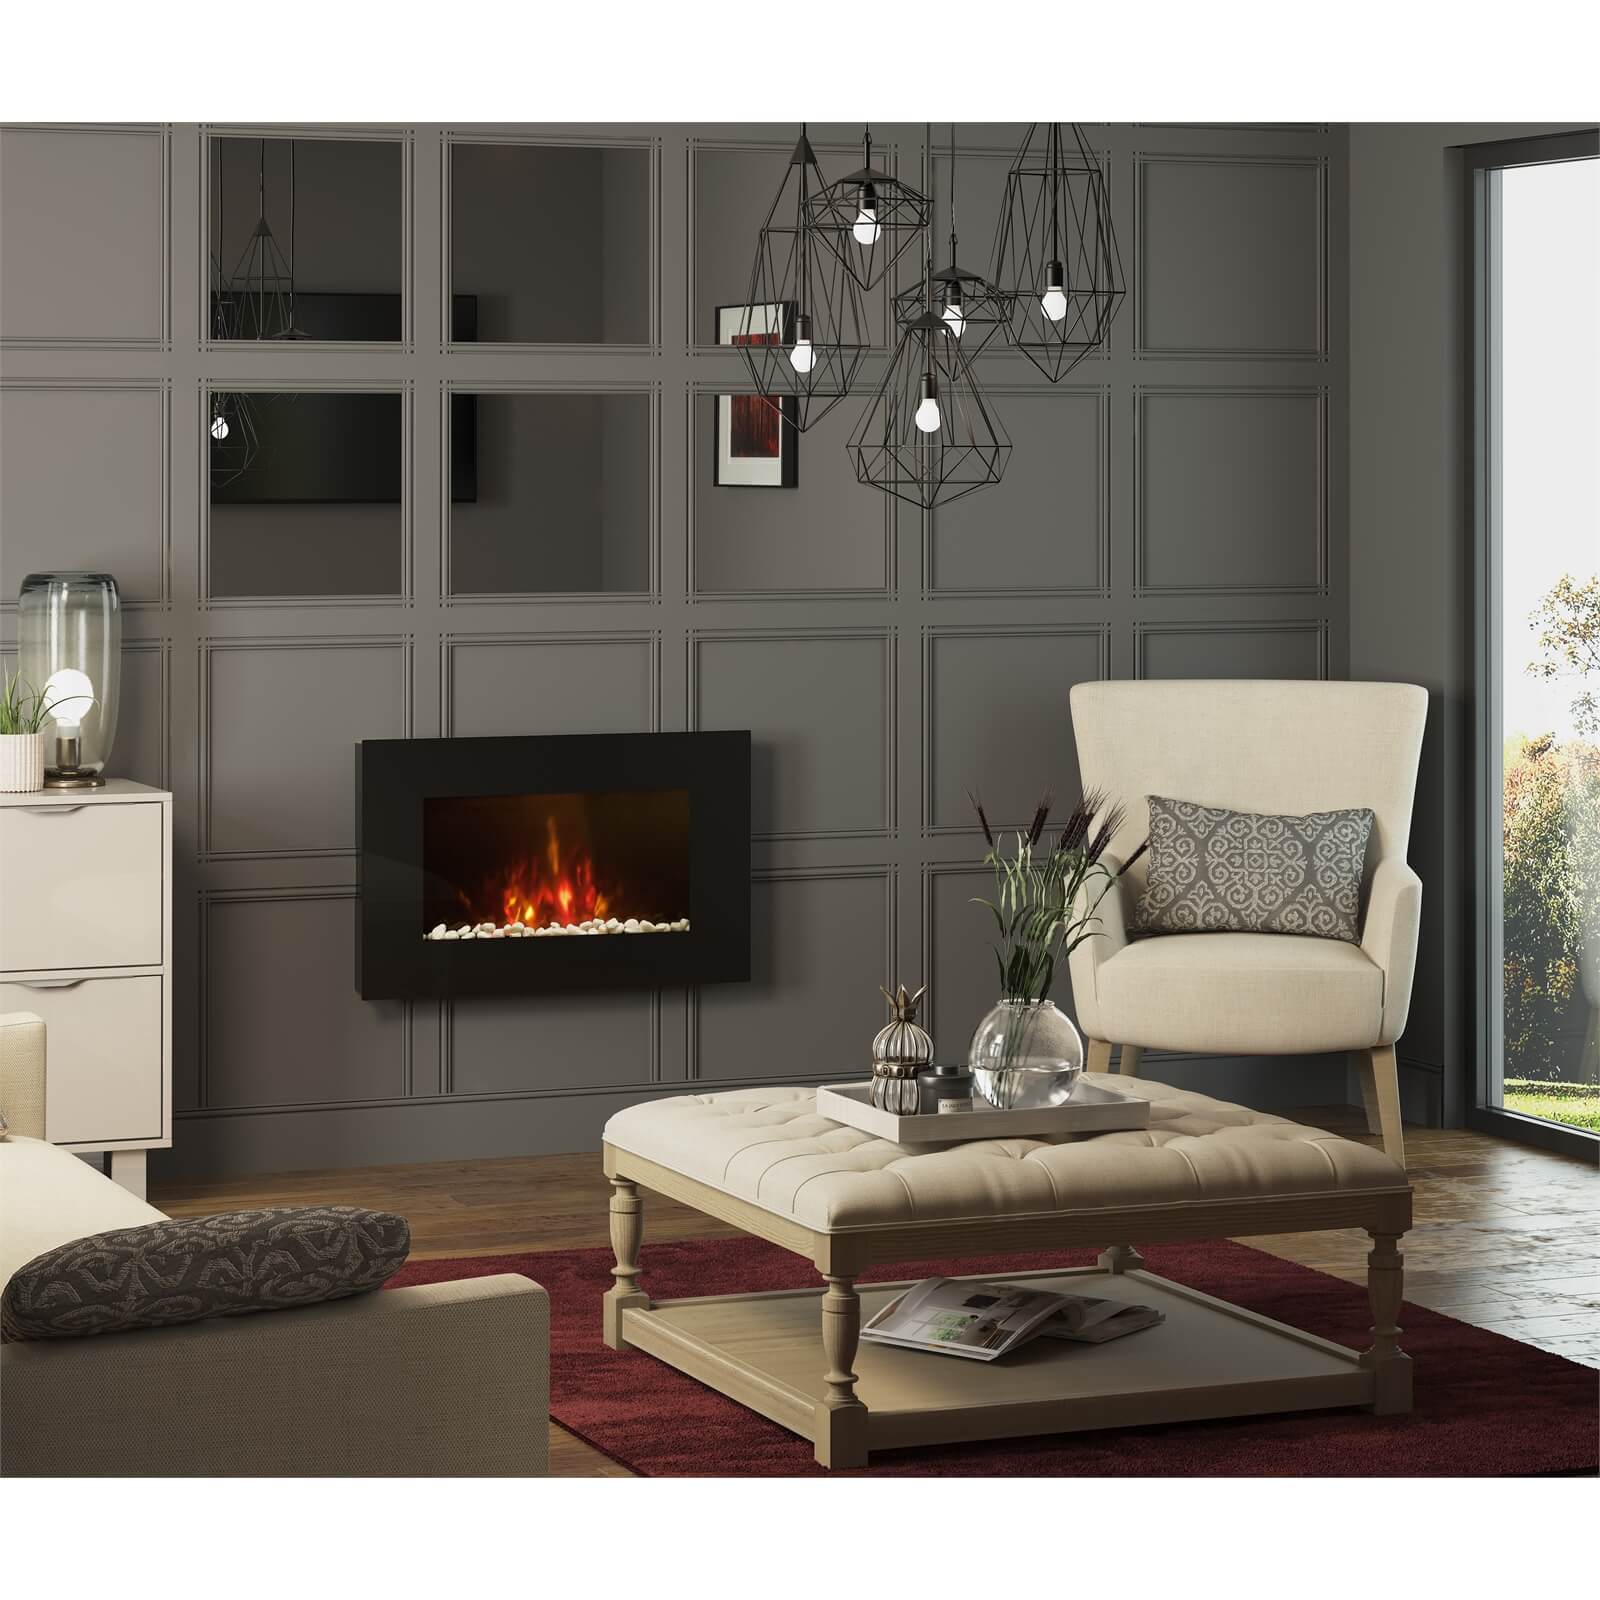 Be Modern Azonto Electric Fire with Wall Mounted Fitting - Black Glass